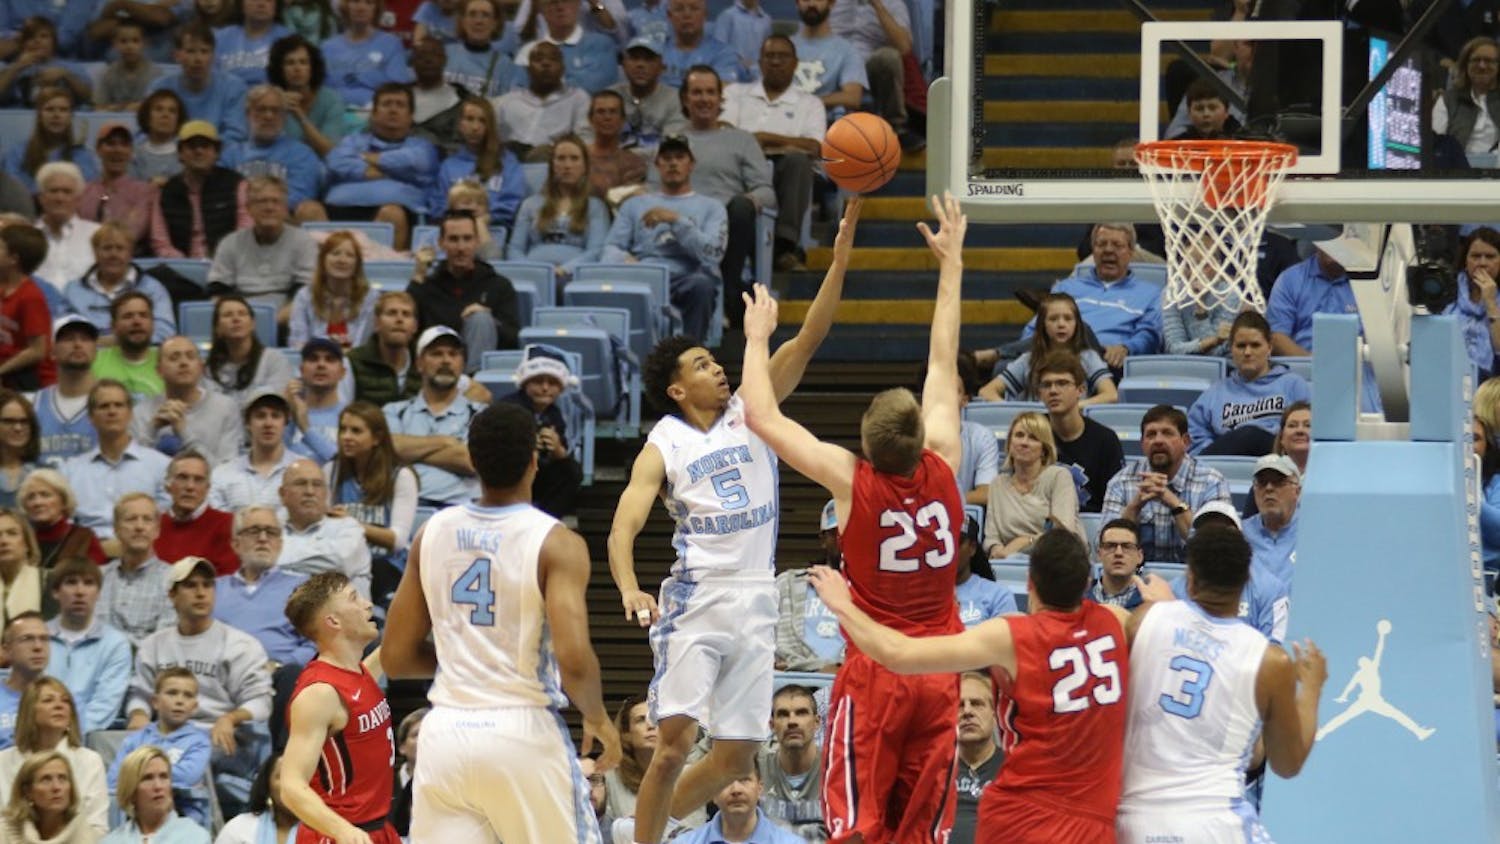 Guard Marcus Paige (5) lays the ball in during UNC's 98-65 route of Davidson.